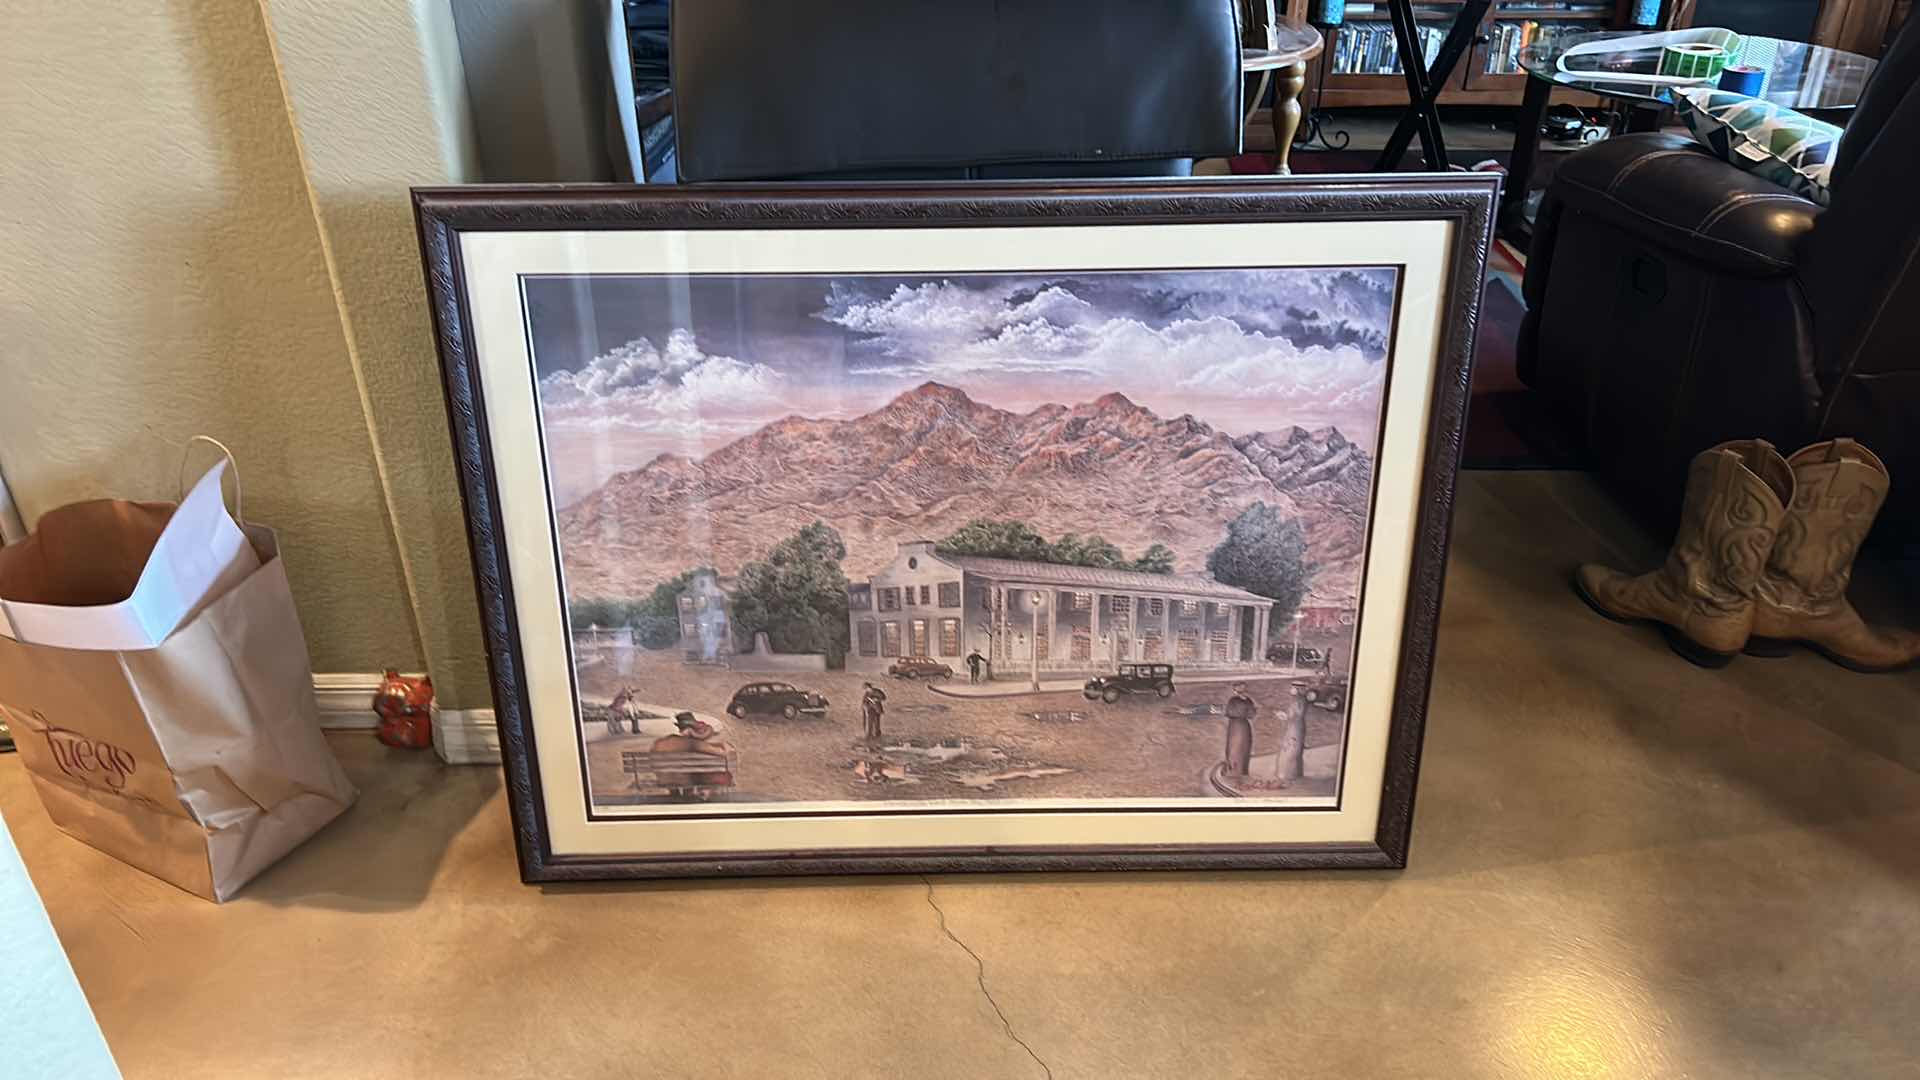 Photo 5 of WALL DECOR - SIGNED NUMBERED’ “DIAMOND IN THE DESERT BOULDER DAM HOTEL CIRCA 1937 FRAMED ARTWORK 43” x 32”